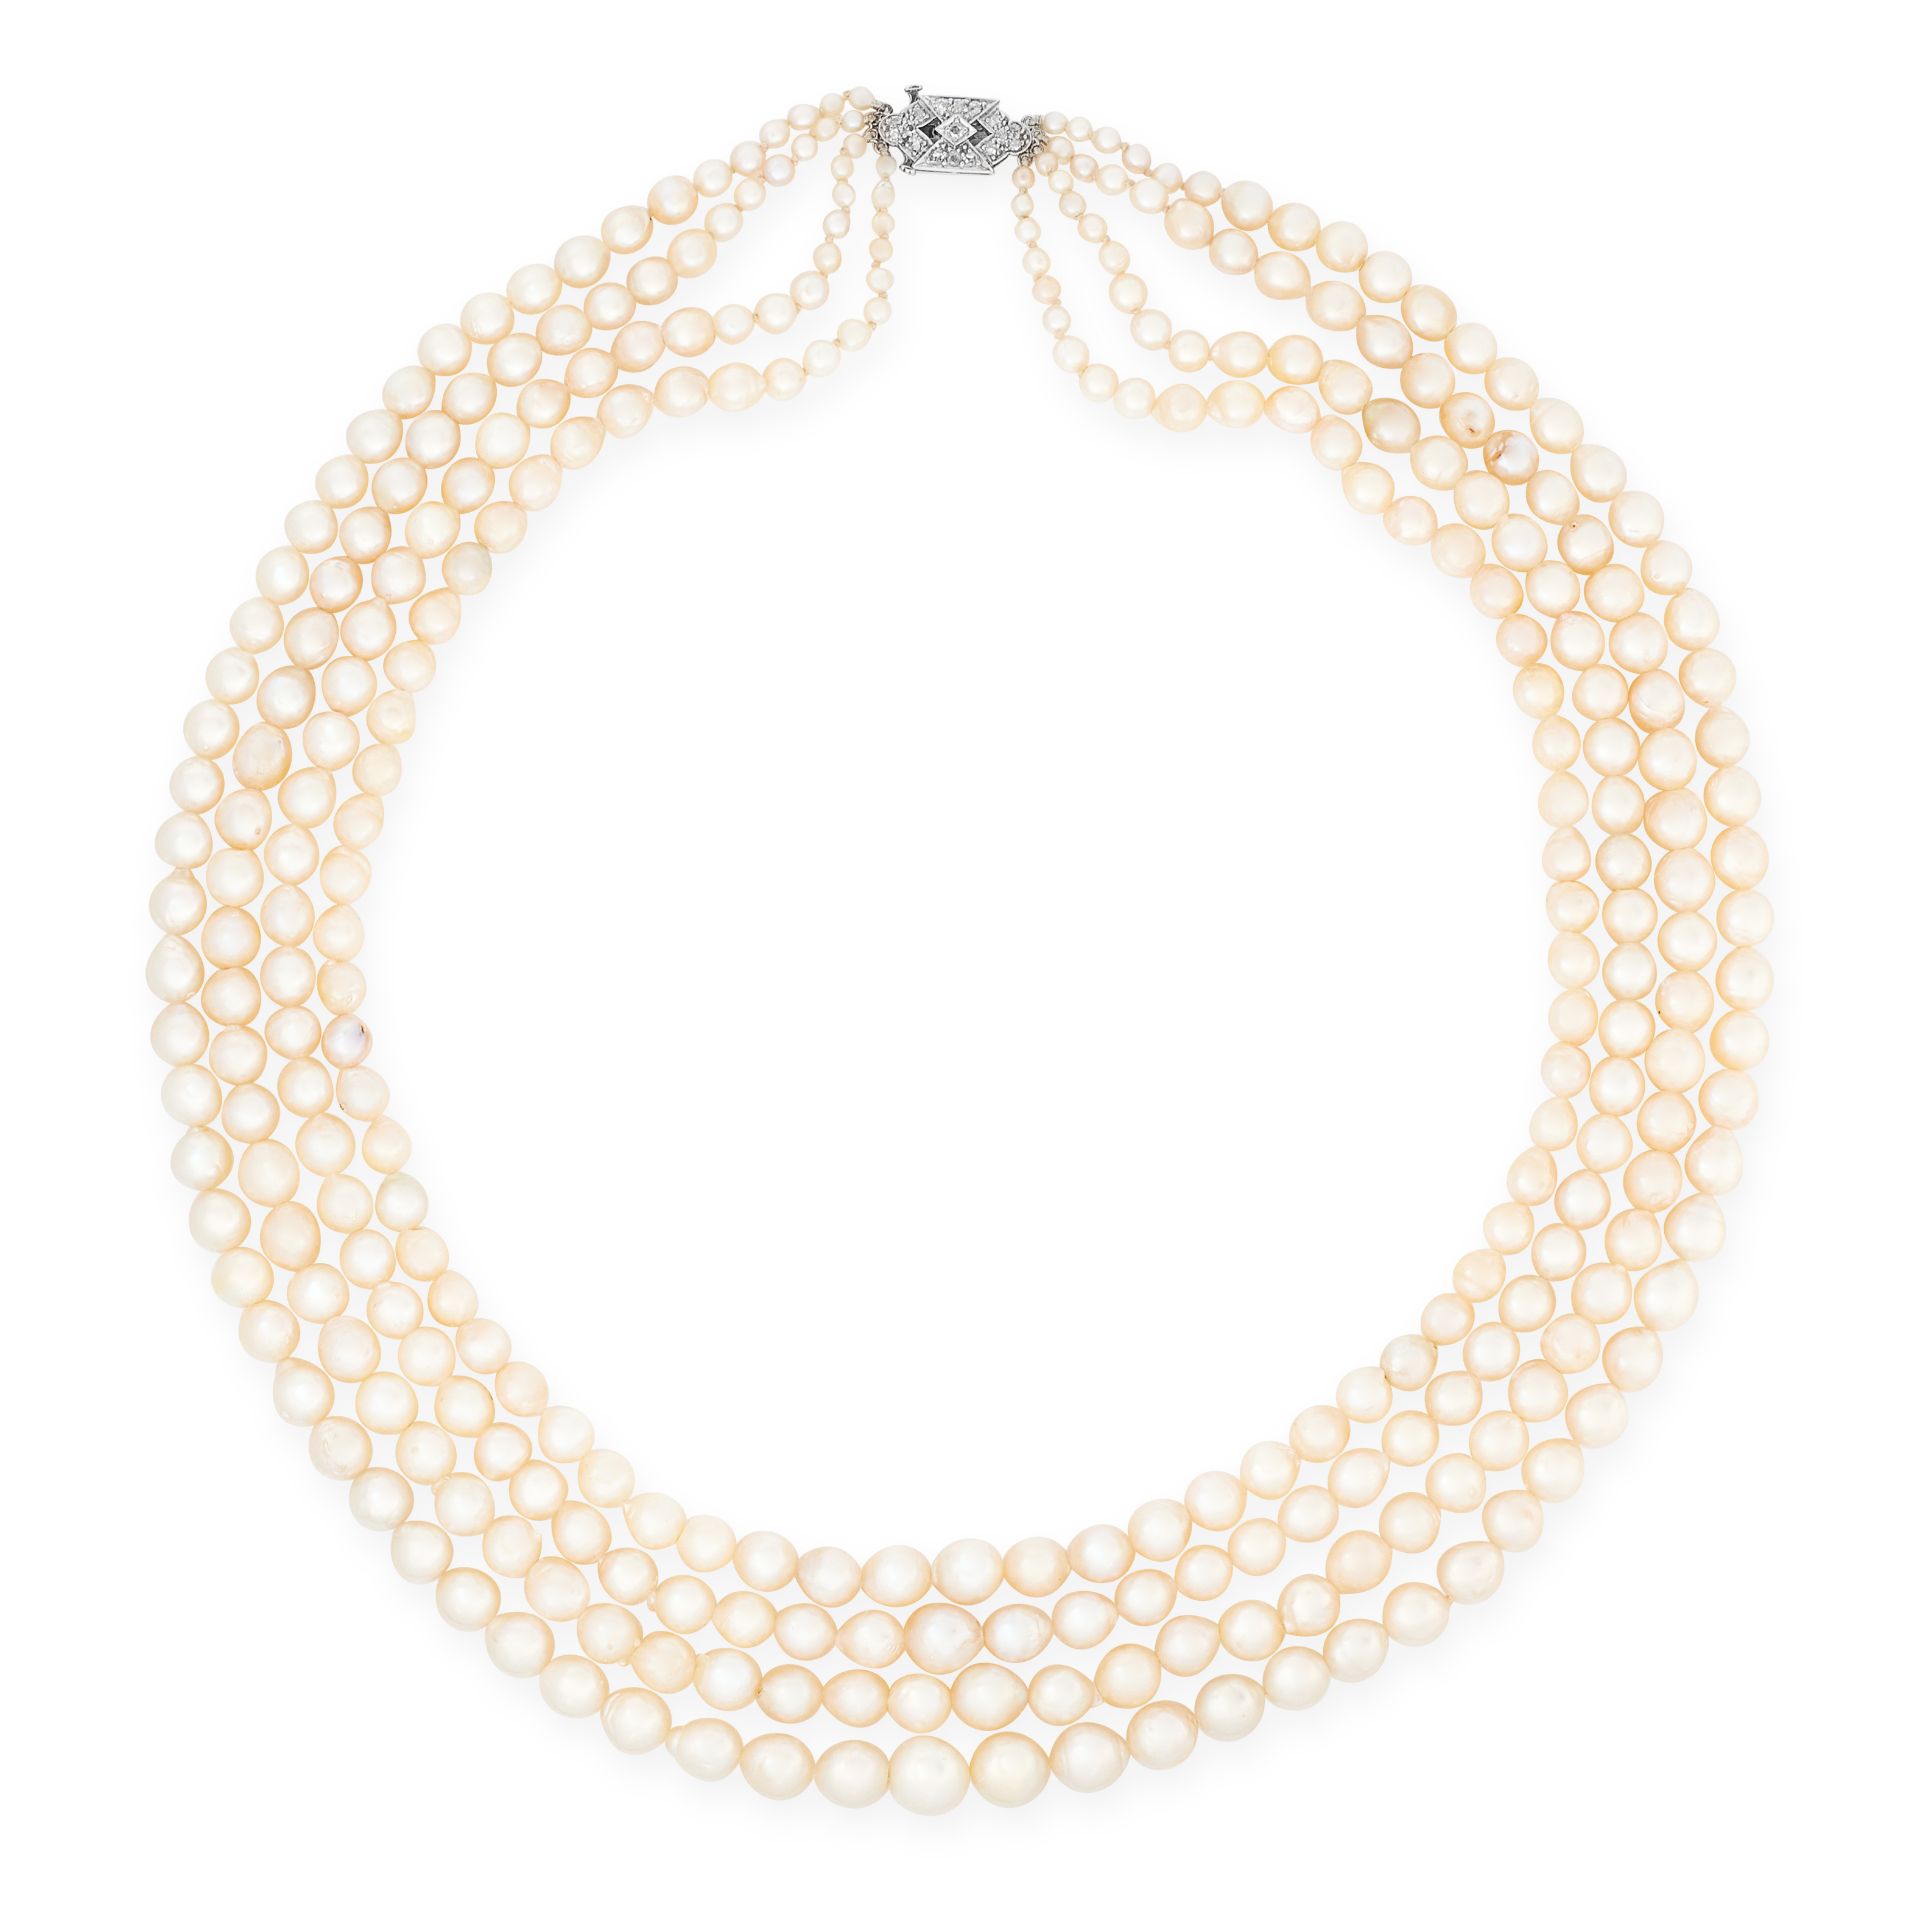 A PEARL AND DIAMOND NECKLACE comprising of four strands of pearls ranging from 2.9mm - 9.8mm in